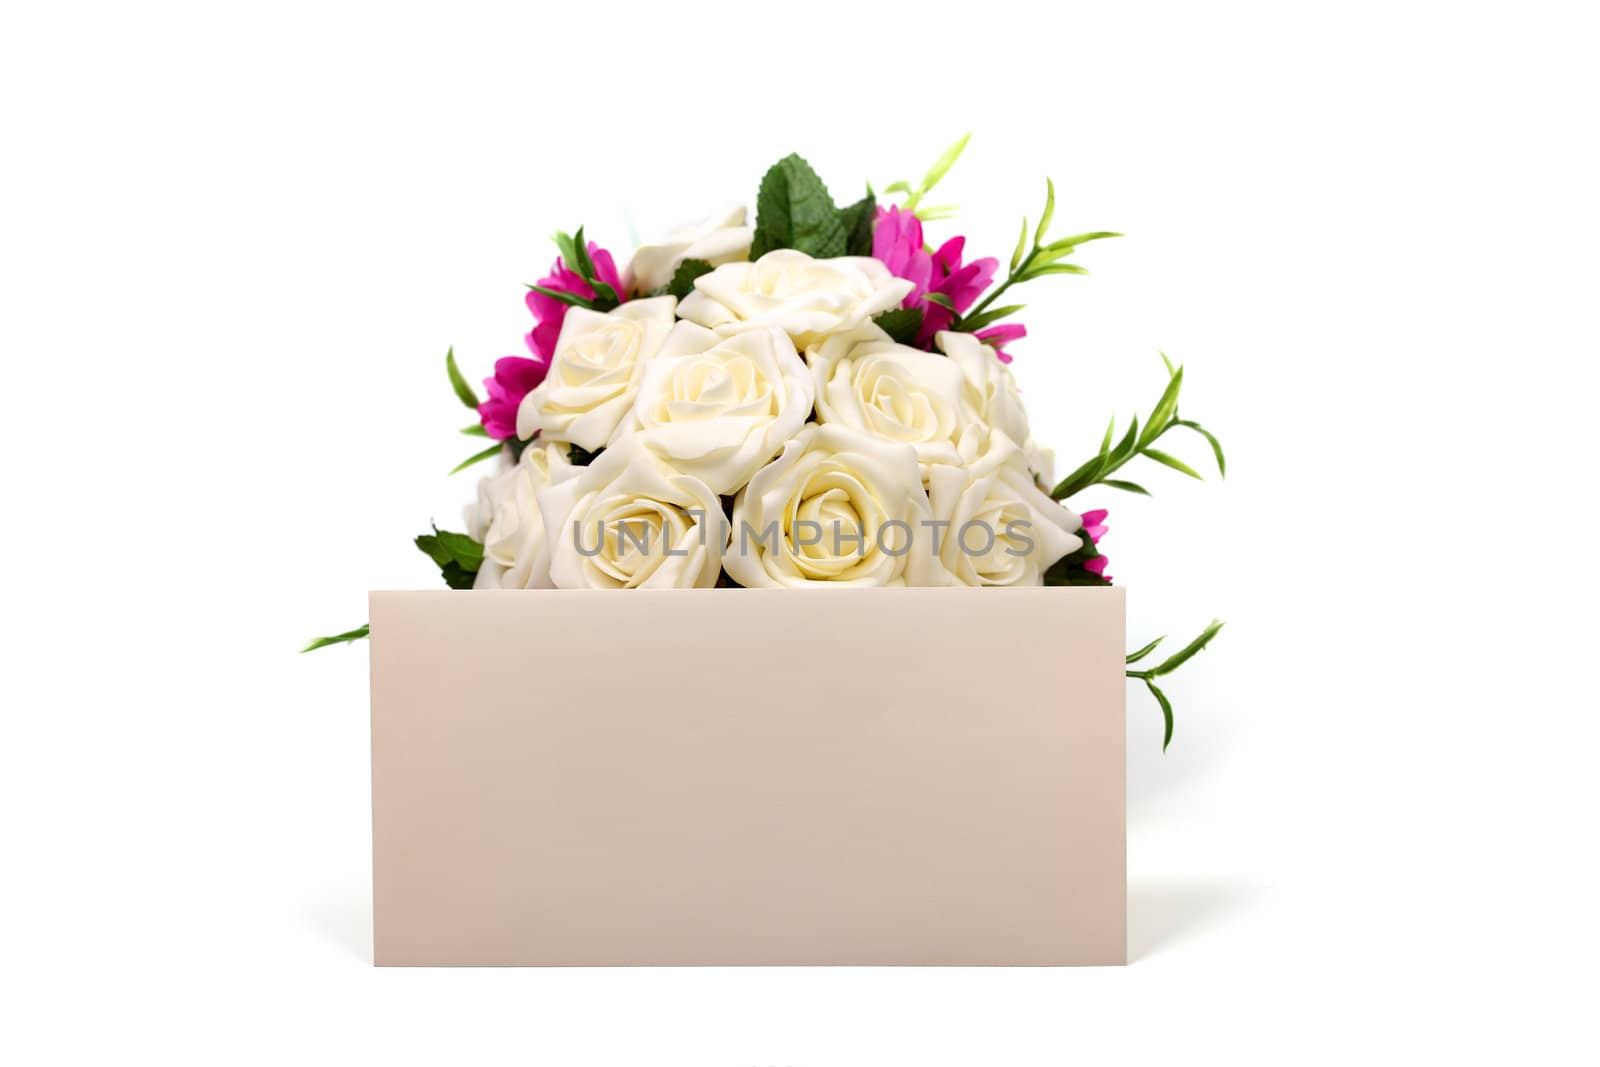 Bunch of roses and textured blank envelope isolated on white bac by borodaev